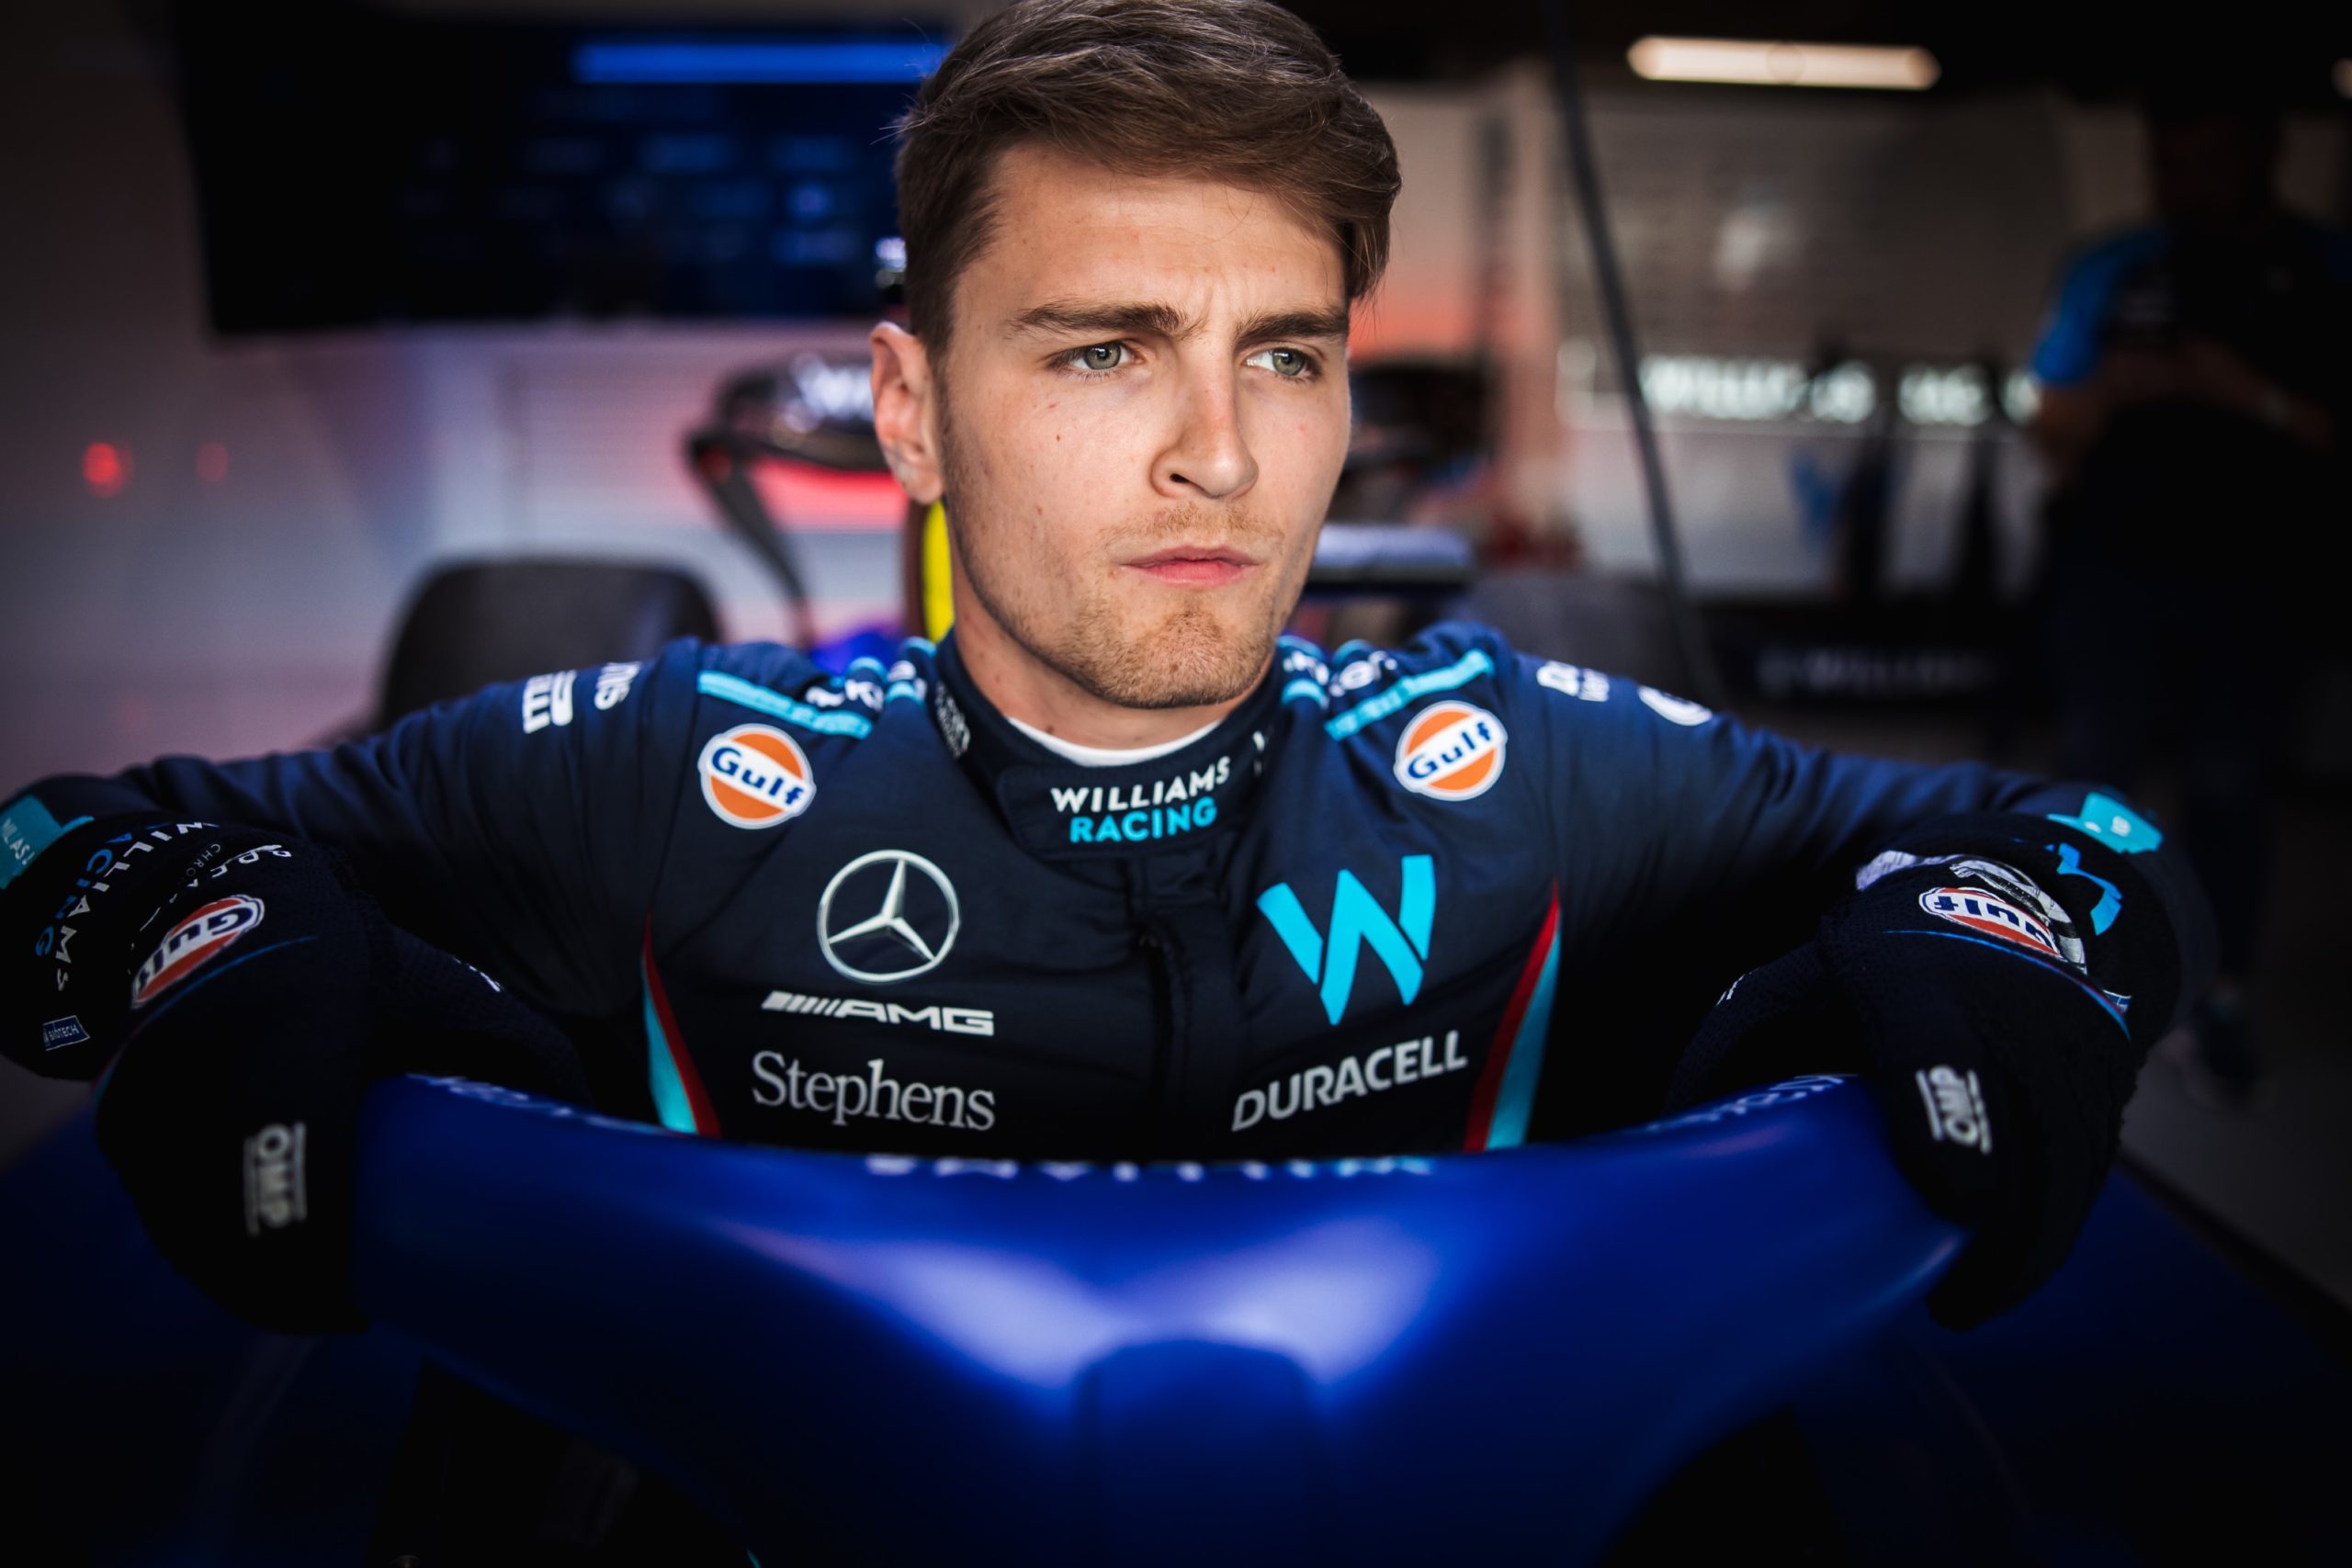 f1 spotlight already on its next at-risk driver after de vries